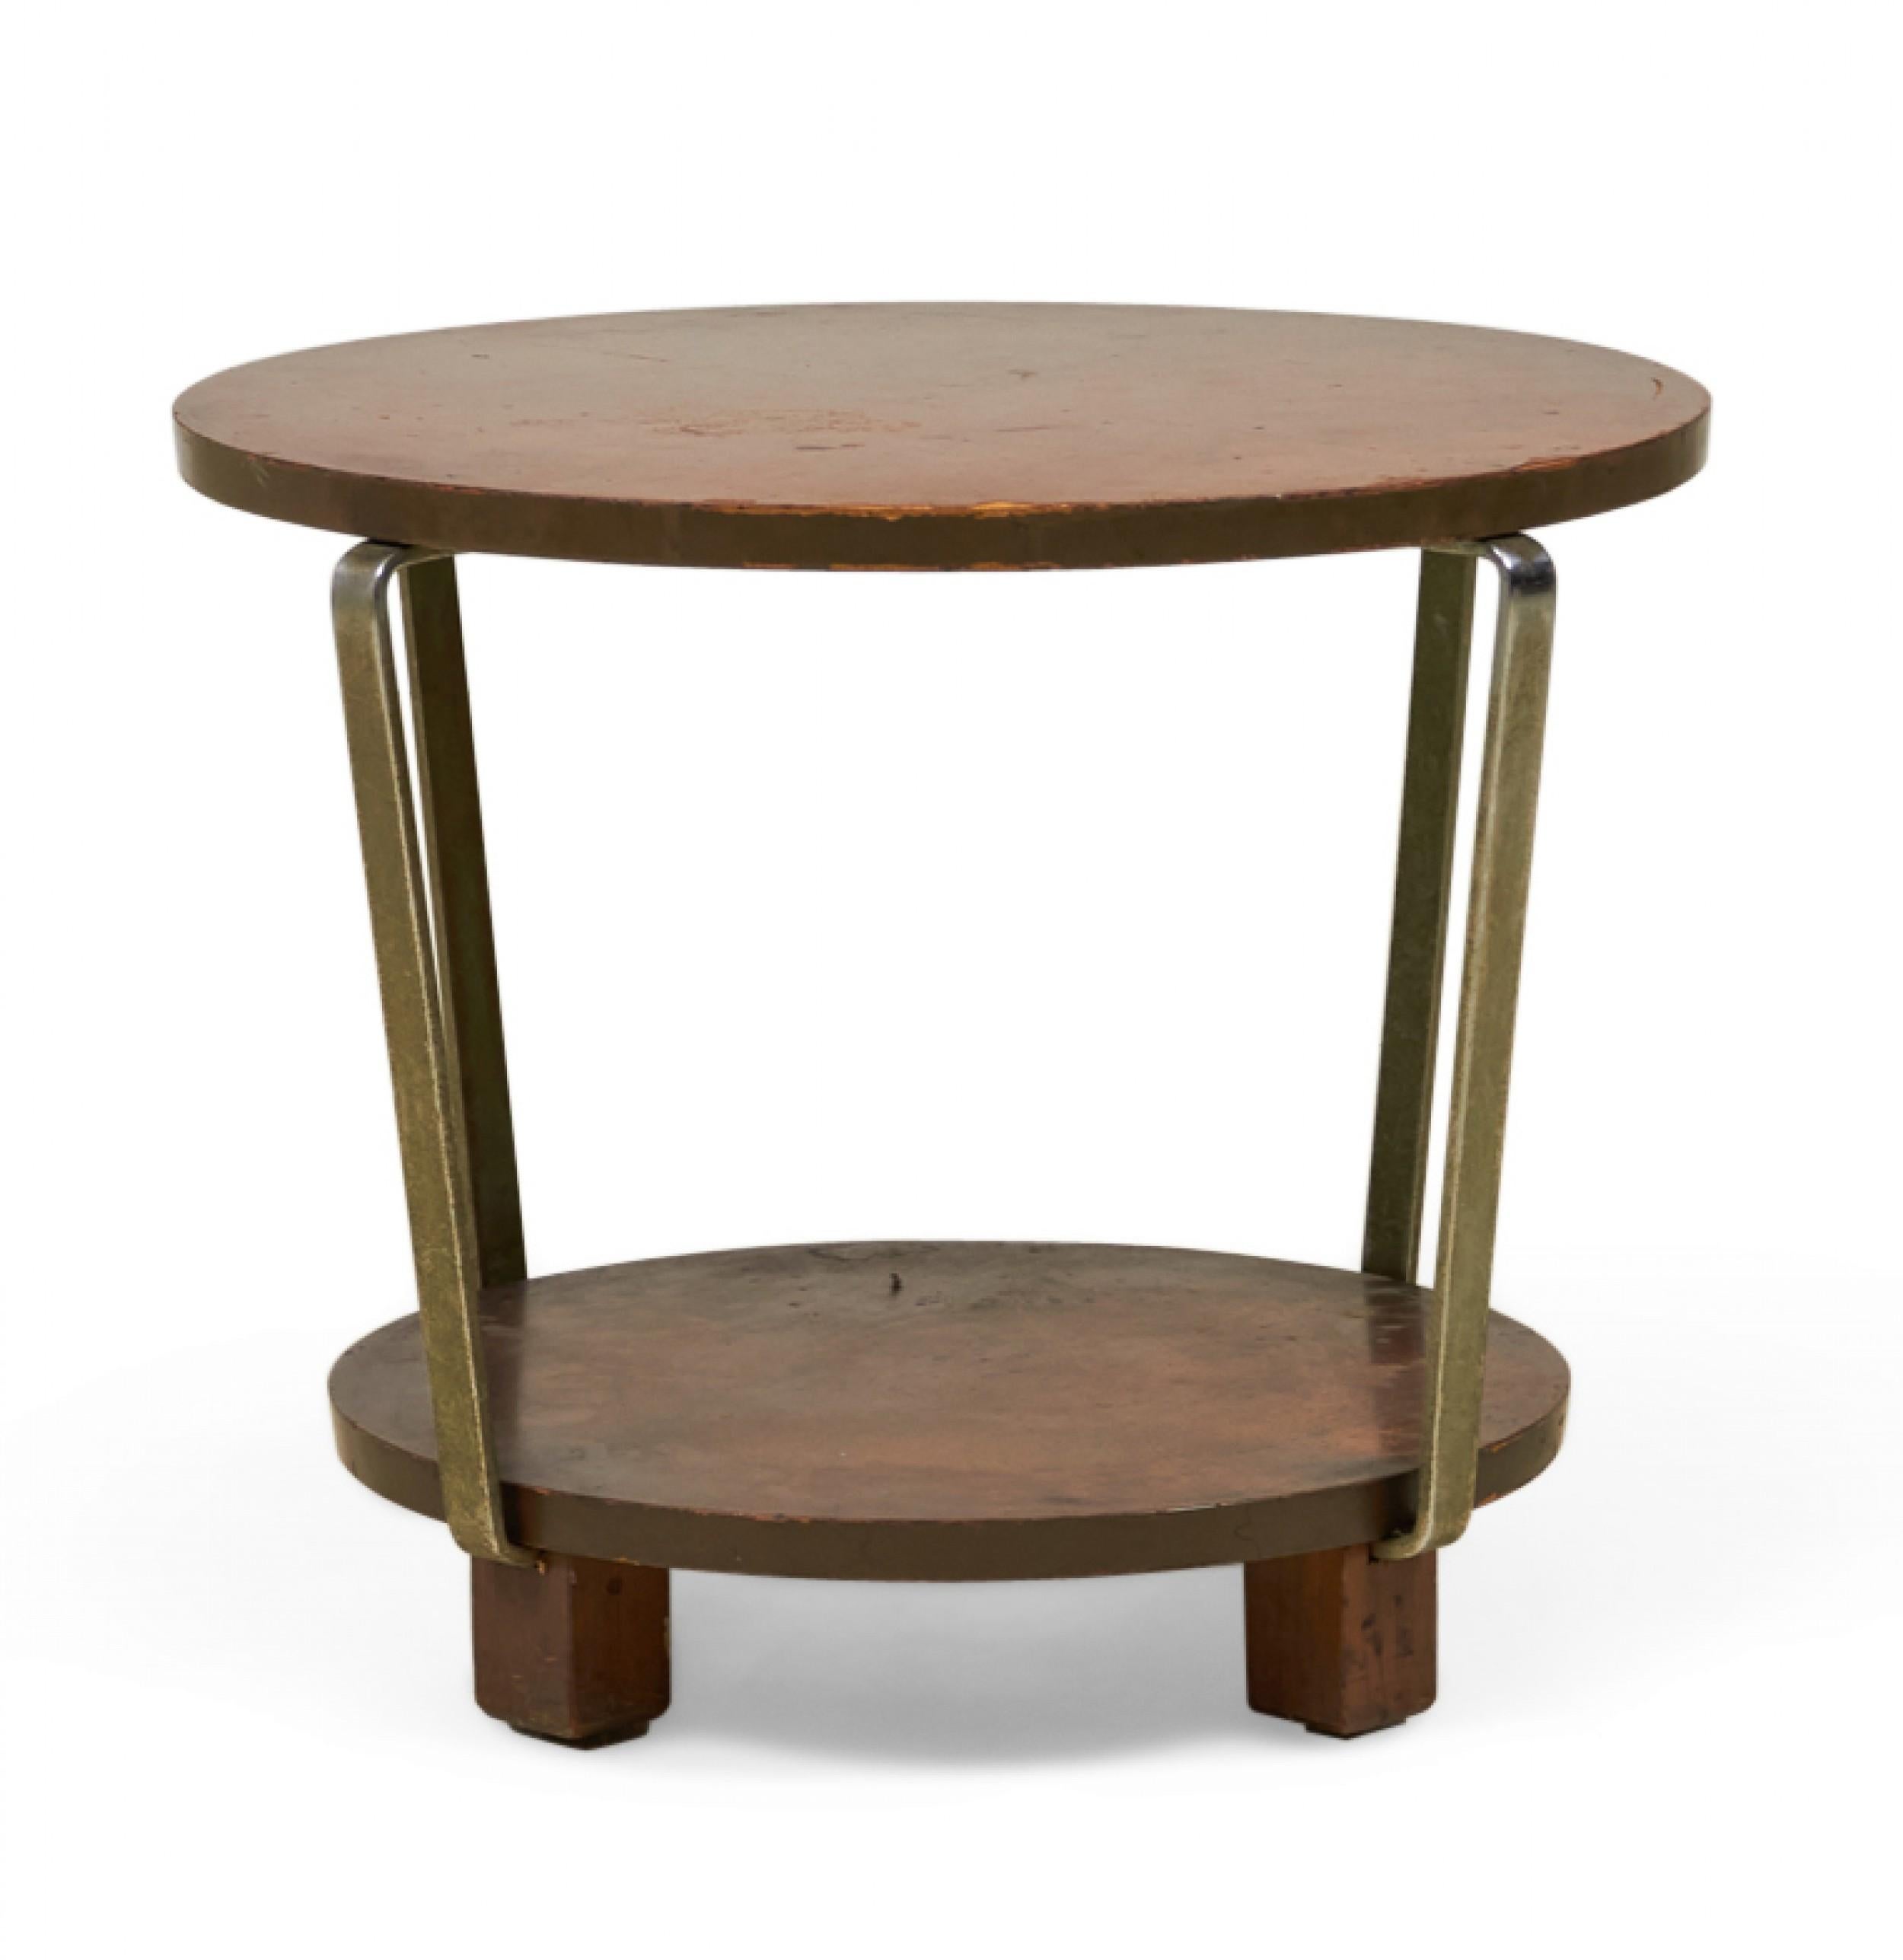 20th Century American Art Deco Circular Walnut and Brass Occasional / Side Table For Sale